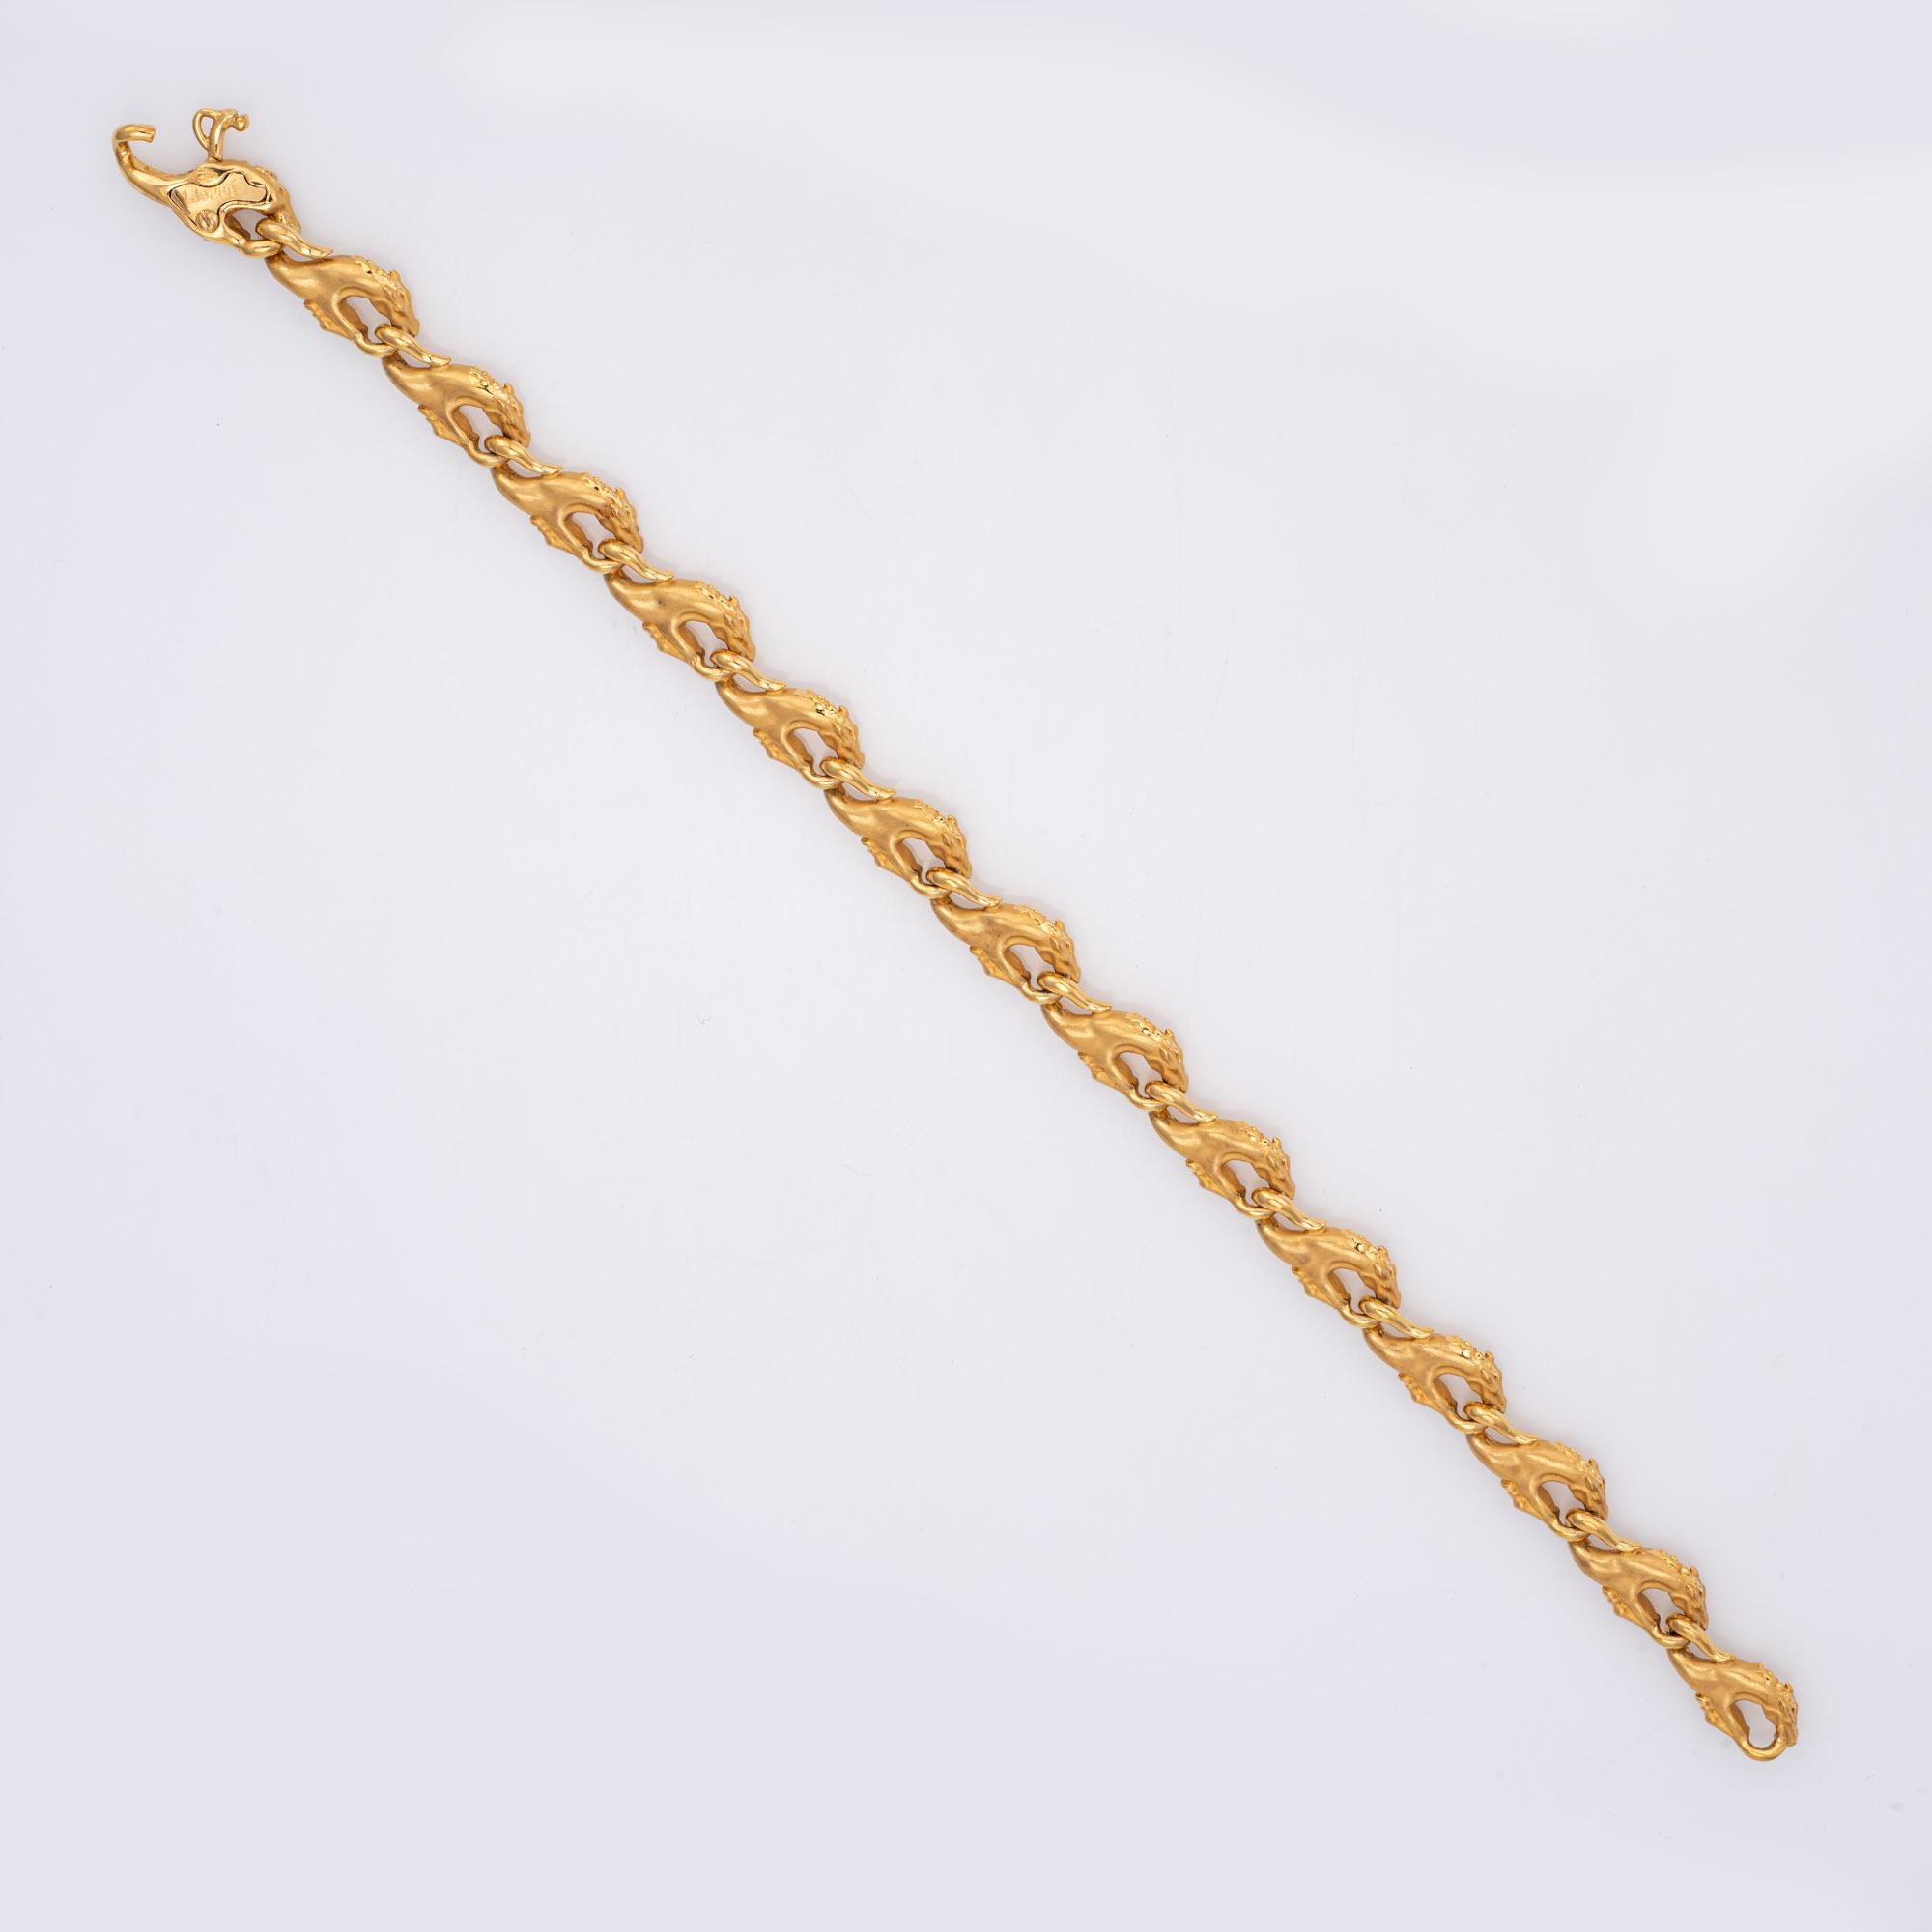 Estate Carrera y Carrera horse bracelet crafted in 18 karat yellow gold.  

The beautifully detailed bracelet highlights Horse heads uniformly linked together. The bracelet is great worn alone or layered with your fine jewelry from any era. The